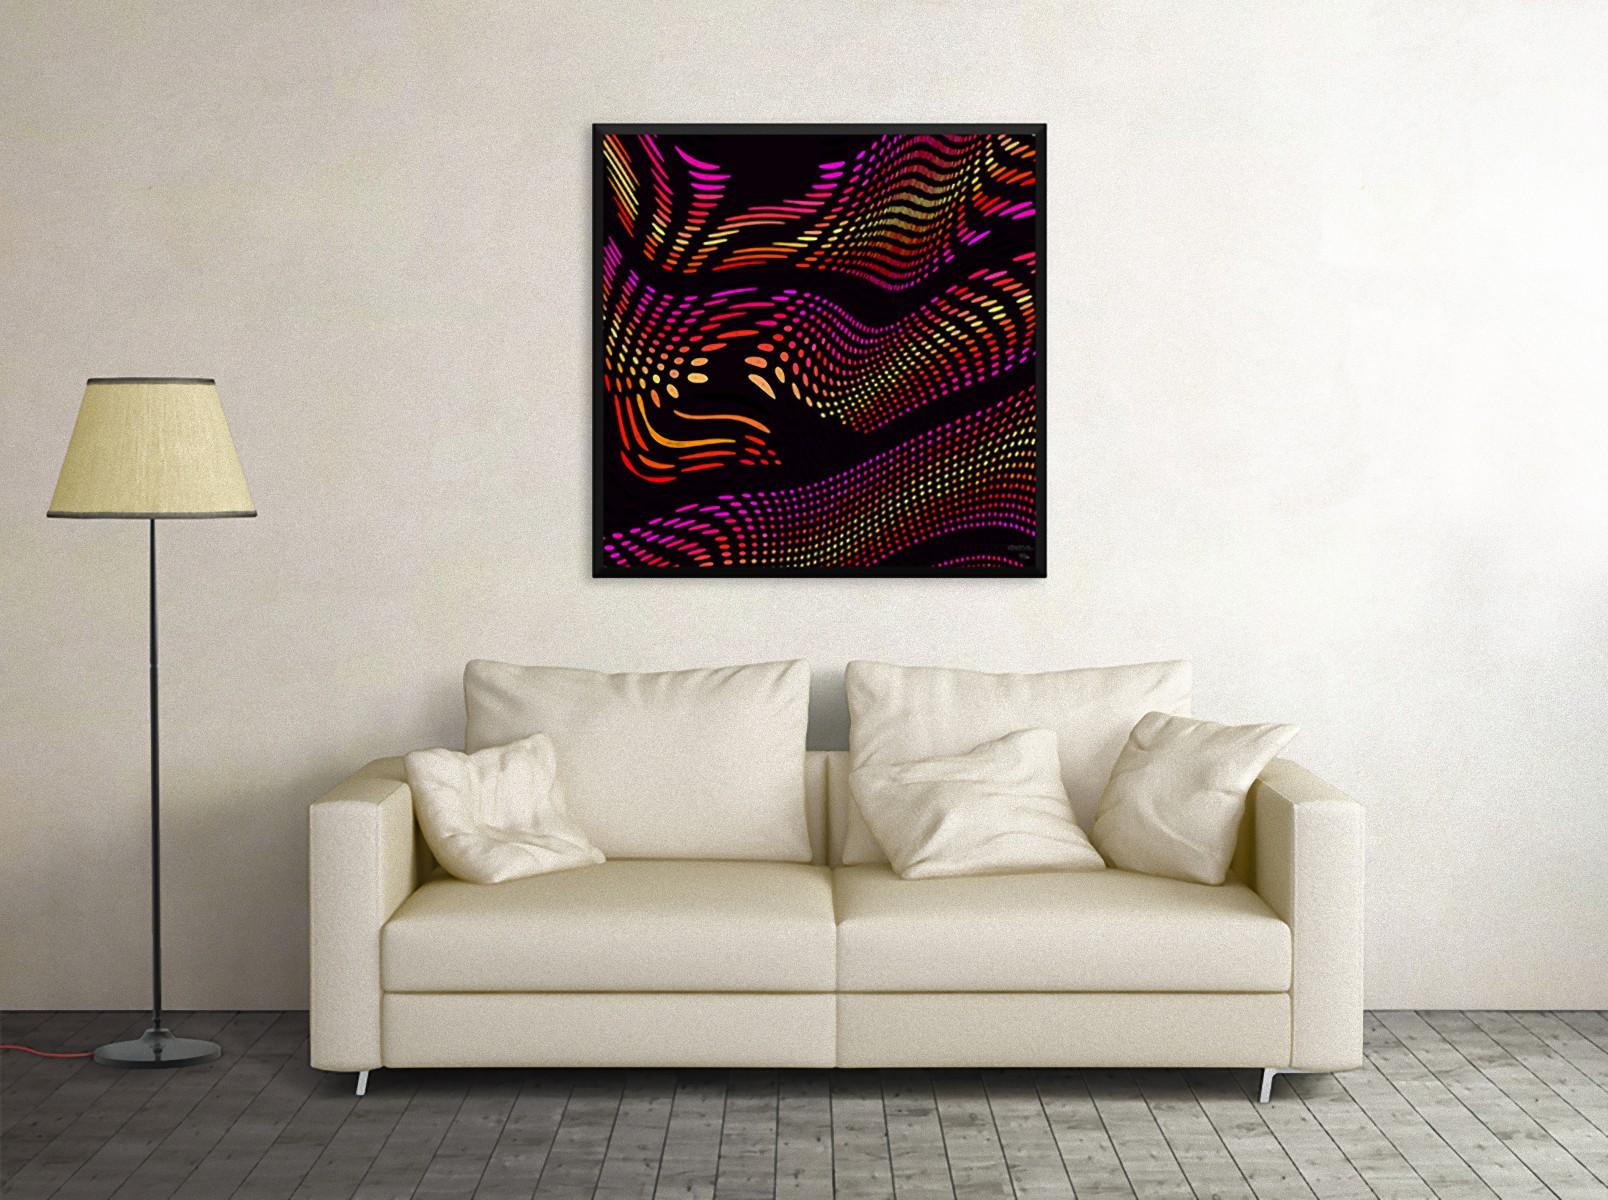 Saxophone C Minor  is a beautiful  giclée print realized by the contemporary artist  Dadodu in 2017 .

This original artwork shows an abstract composition with music notes playing in a virtual black space, creating the effect of a melody. This print